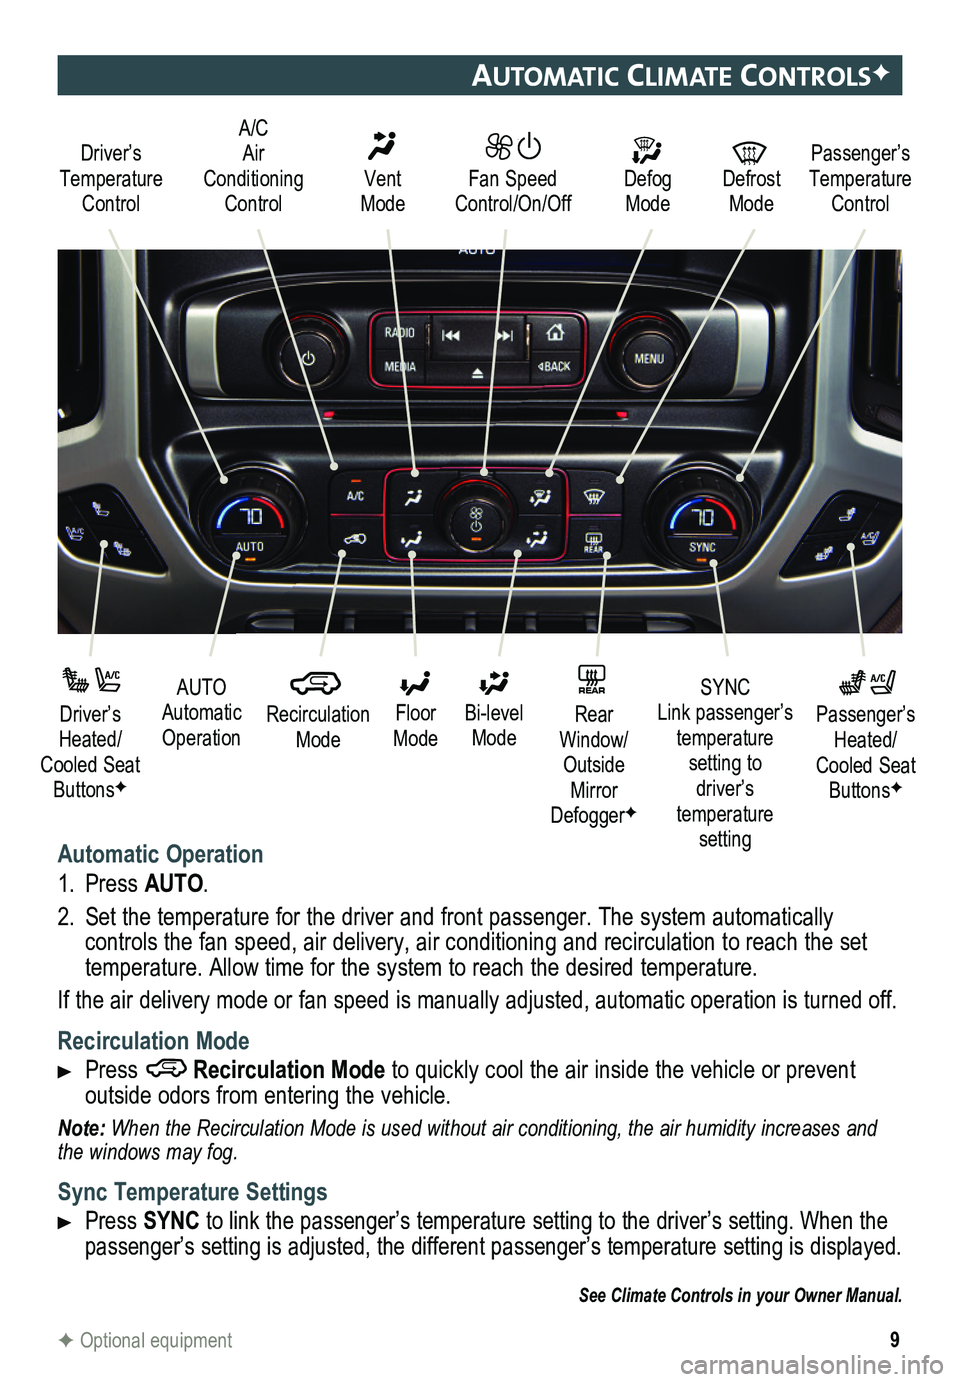 GMC SIERRA 2015  Get To Know Guide 9
automatIc clImate controlsF
Automatic Operation
1. Press AUTO.
2. Set the temperature for the driver and front passenger. The system autom\
atically  
controls the fan speed, air delivery, air condi